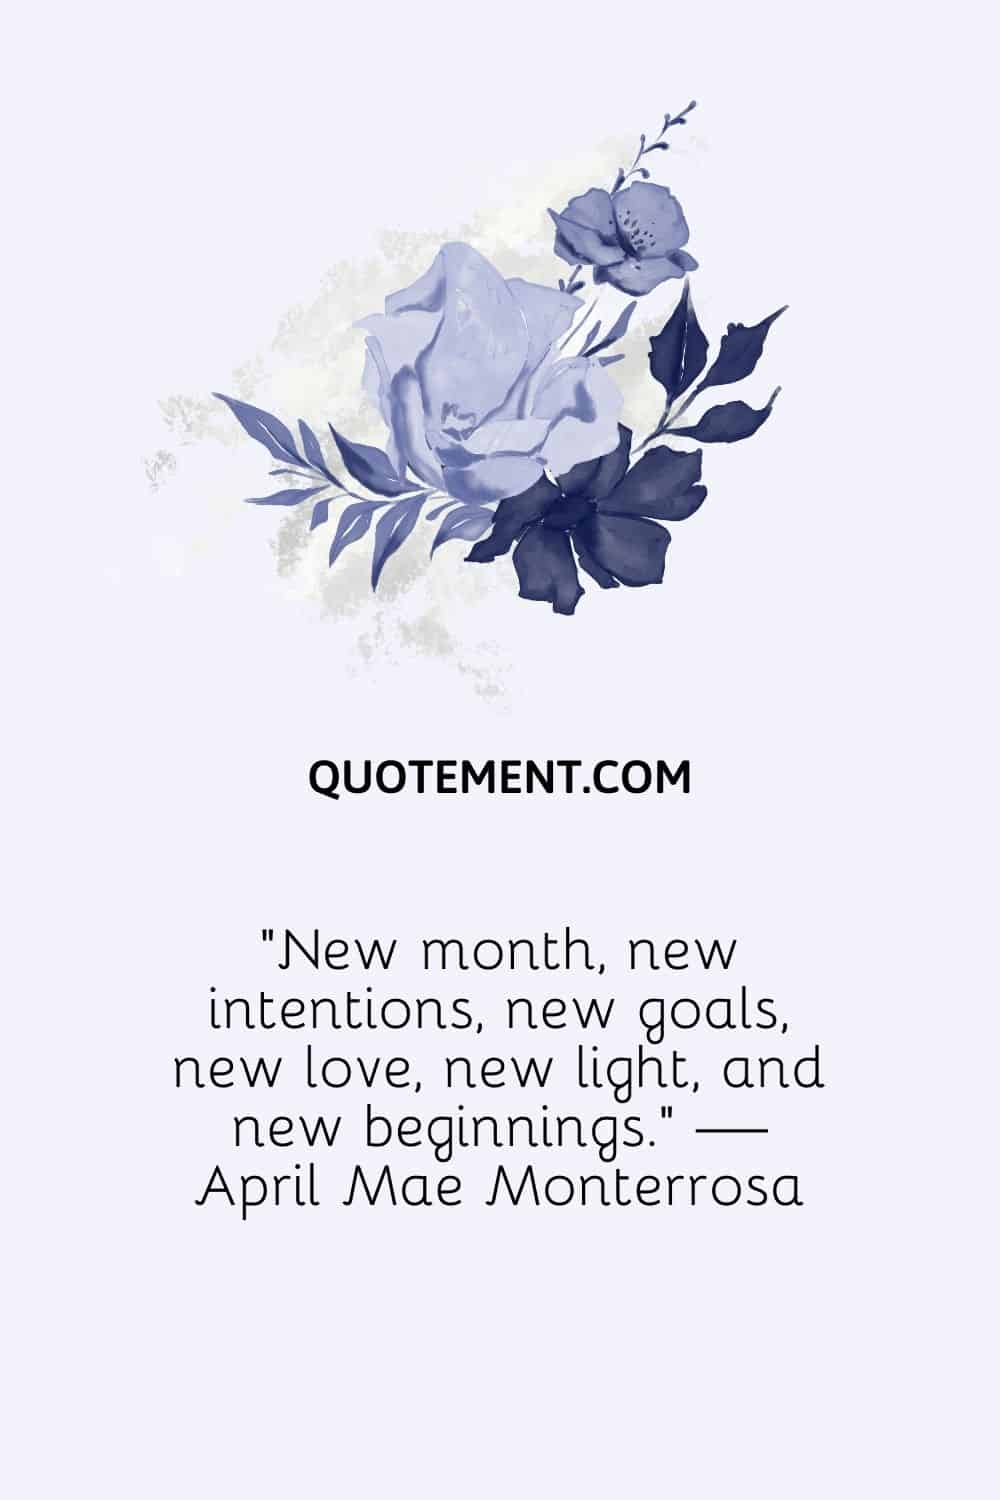 New month, new intentions, new goals, new love, new light, and new beginnings